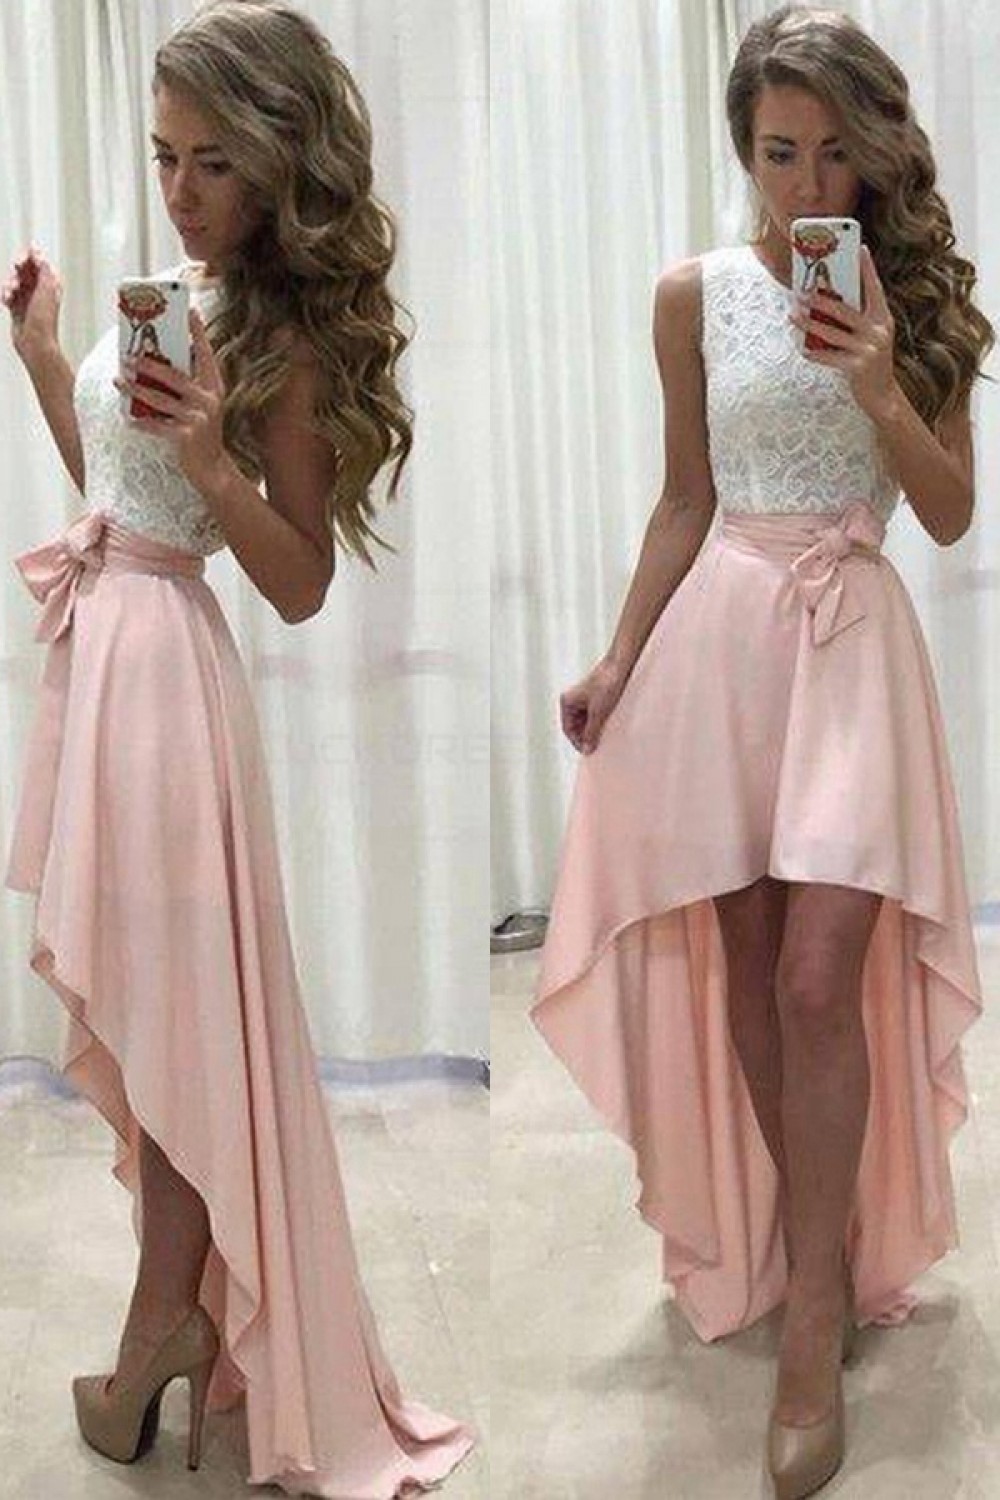 pink dress with white lace